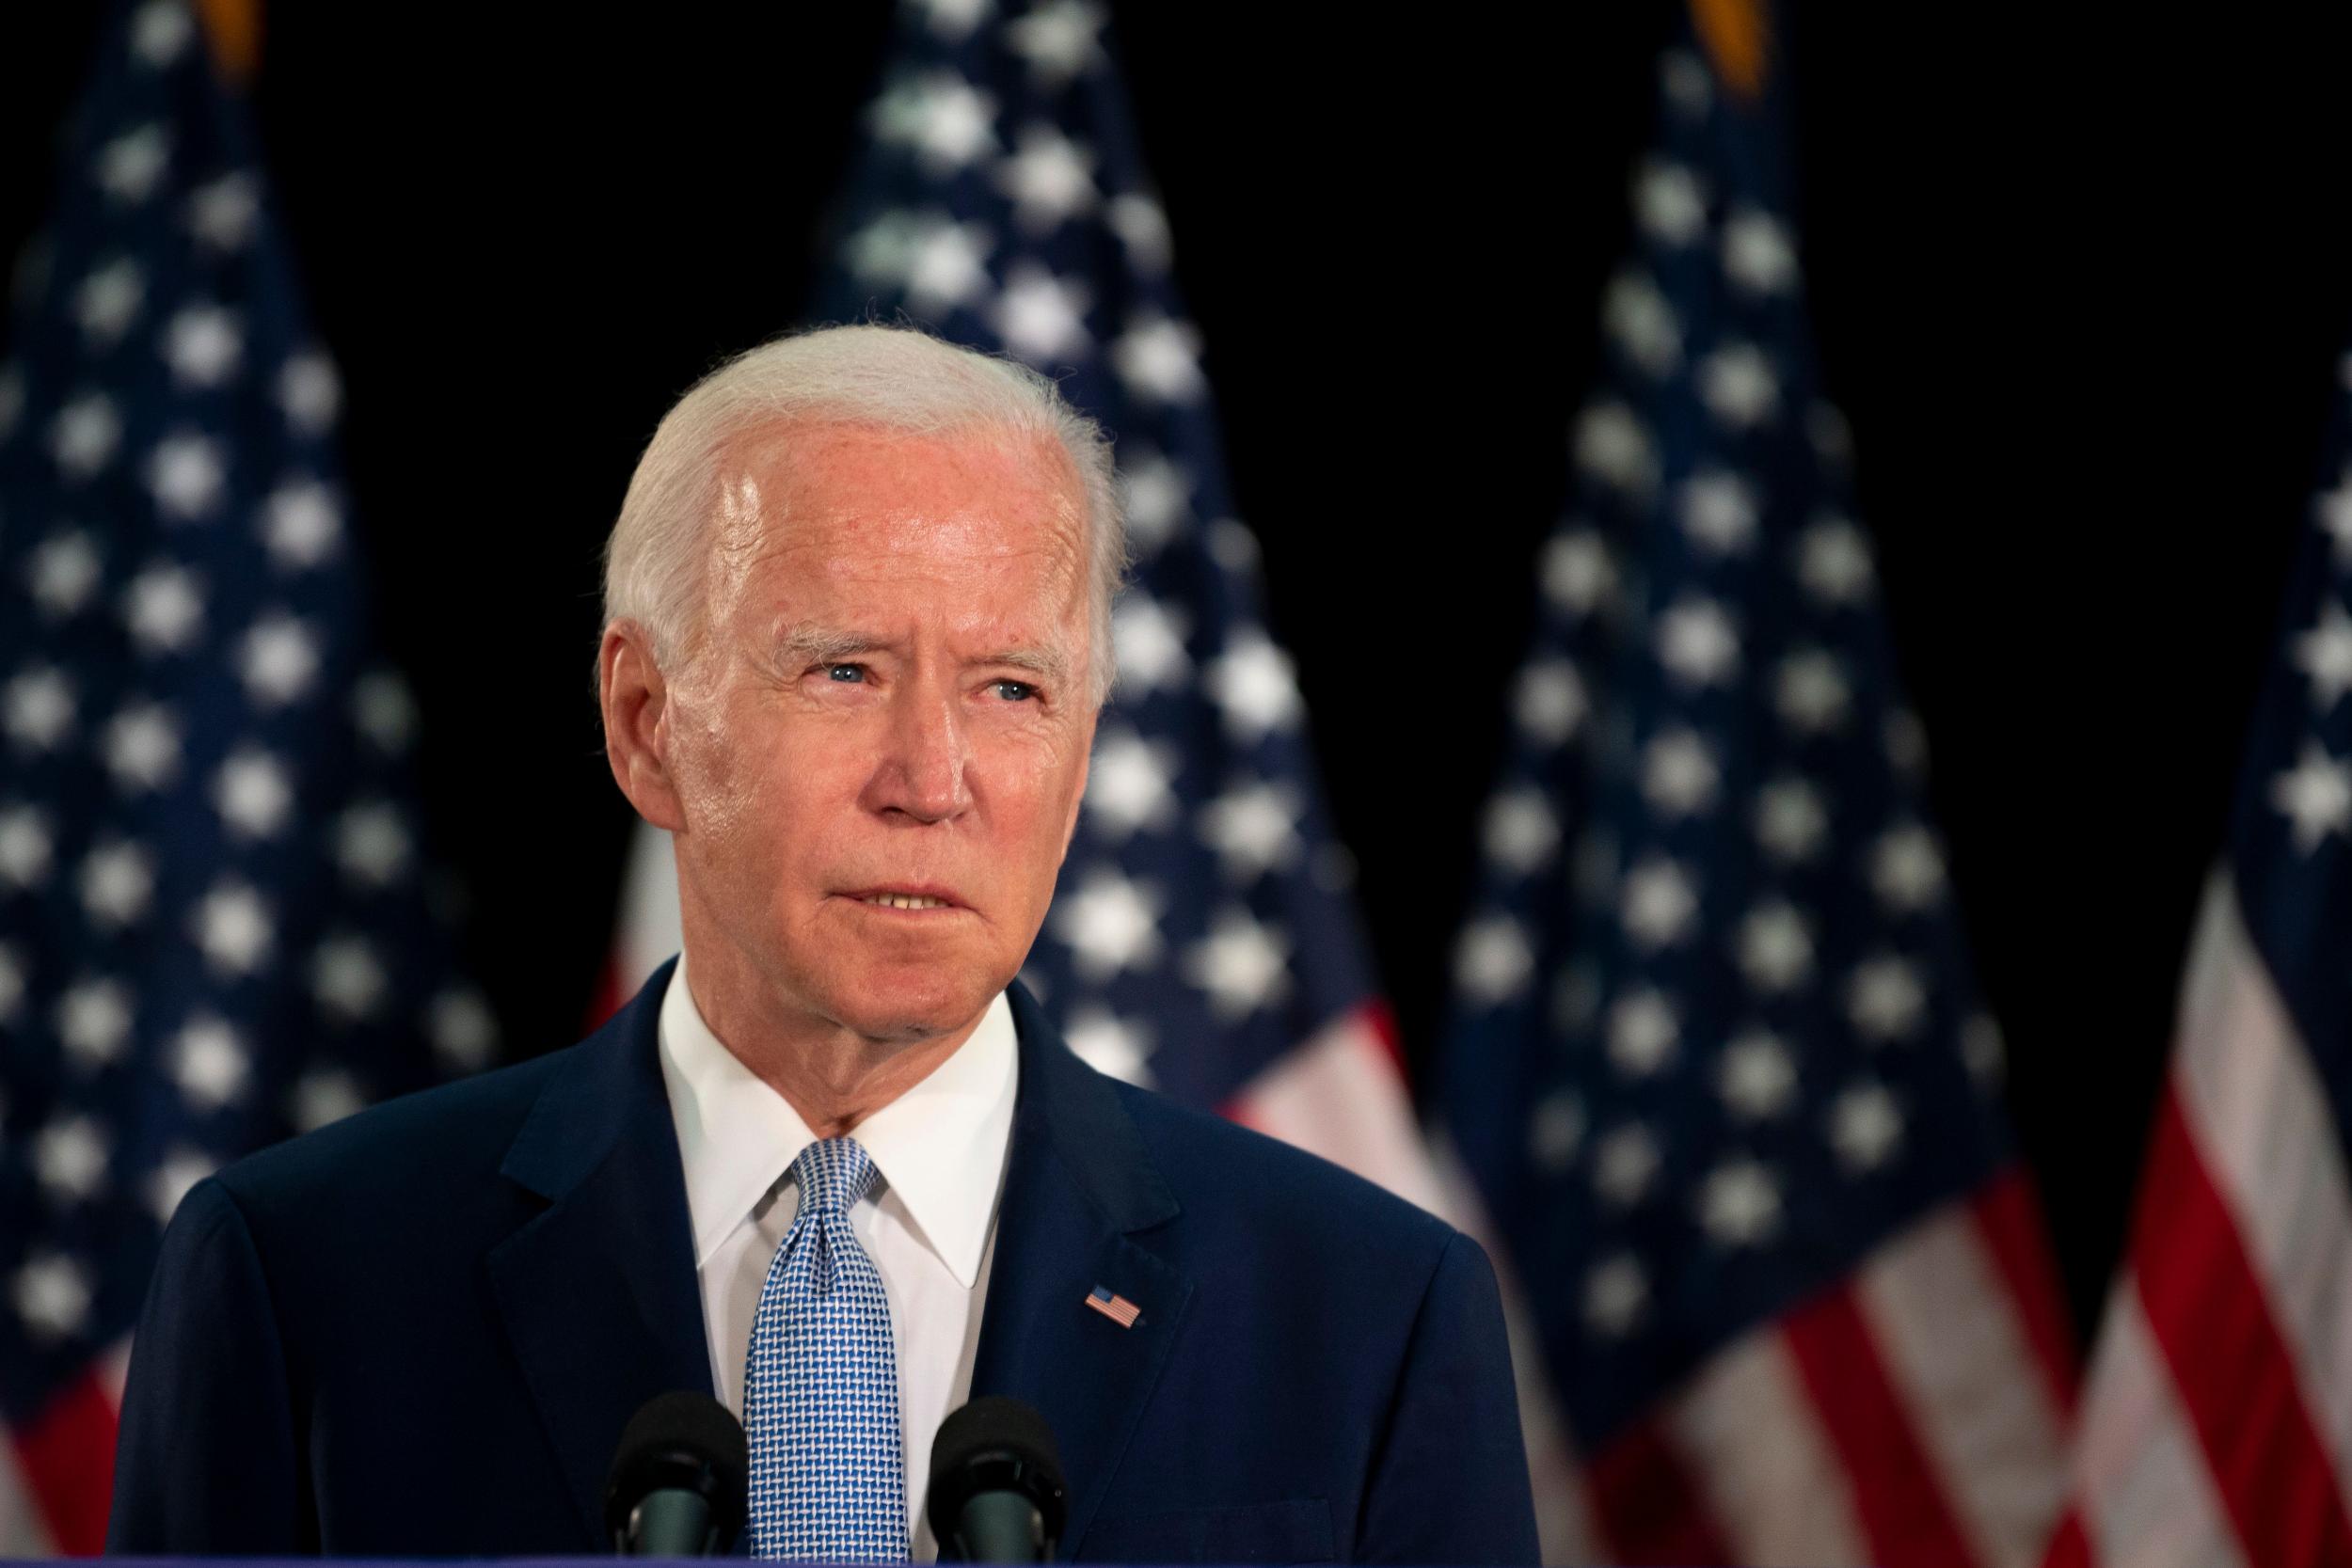 'Completely oblivious': Joe Biden hits out at Trump's 'despicable' George Floyd comments